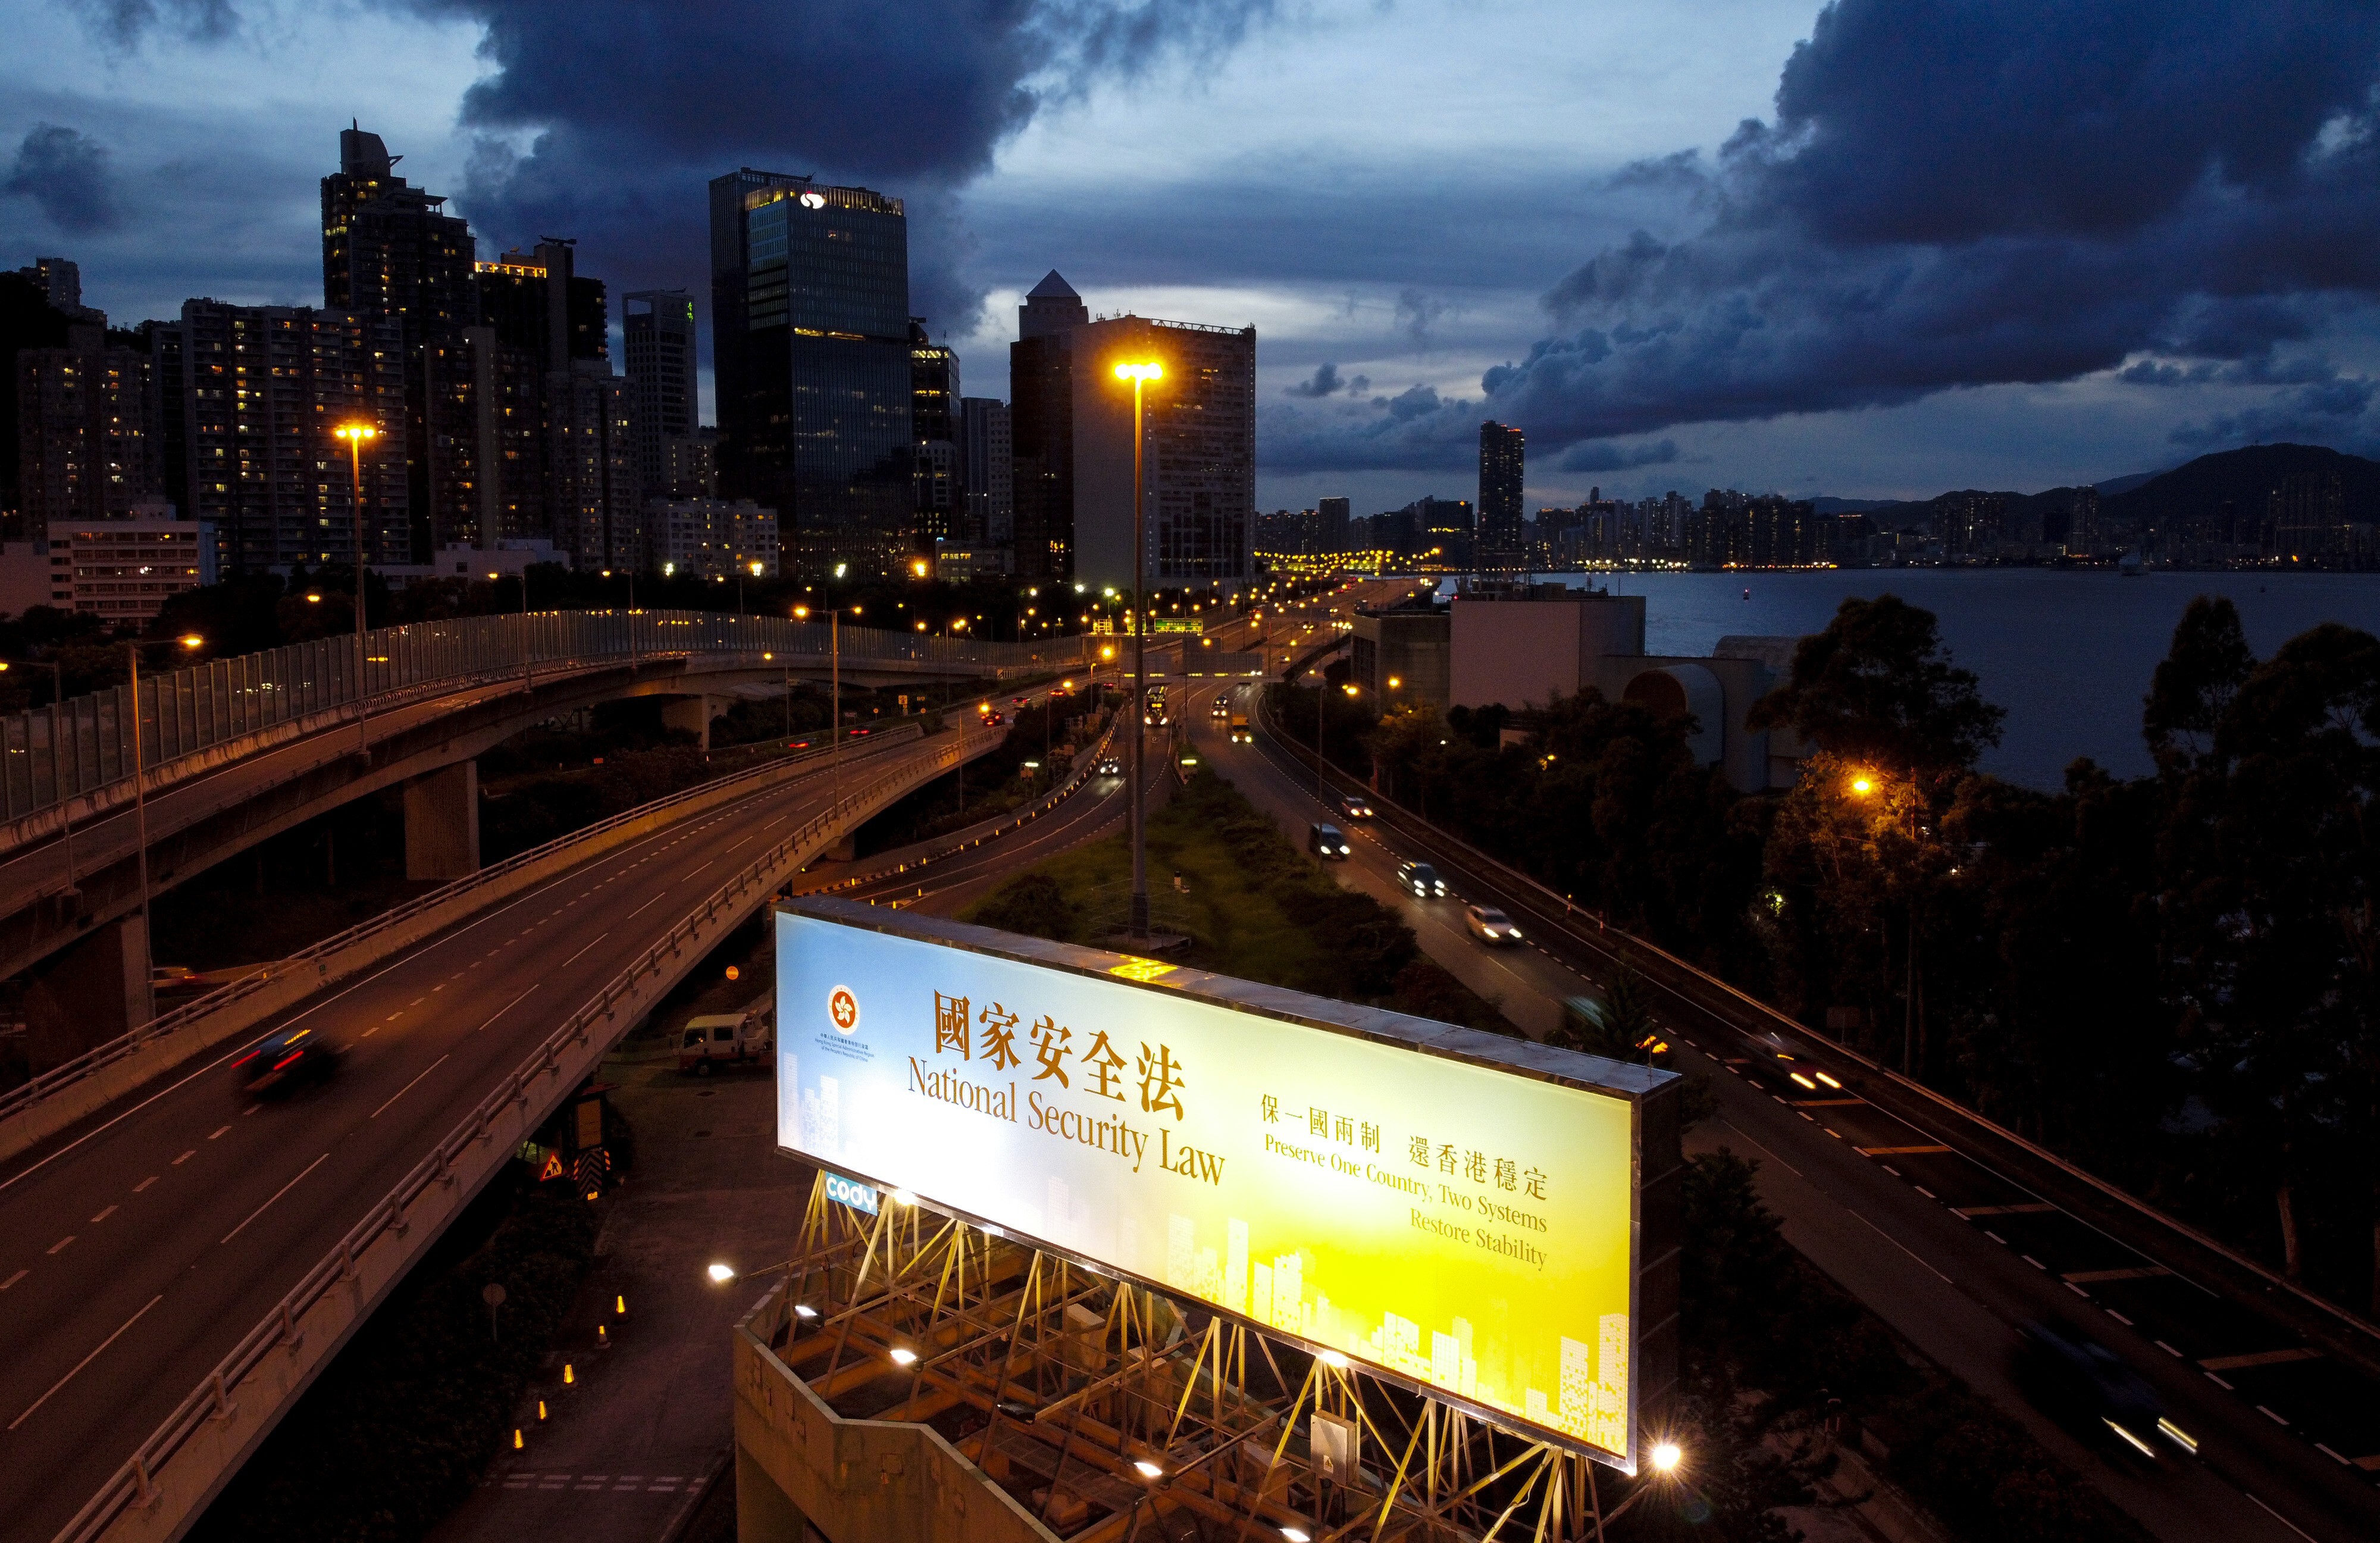 A large hoarding promotes the national security law in Hong Kong’s eastern district of Quarry Bay on July 1. Photo: Sun Yeung